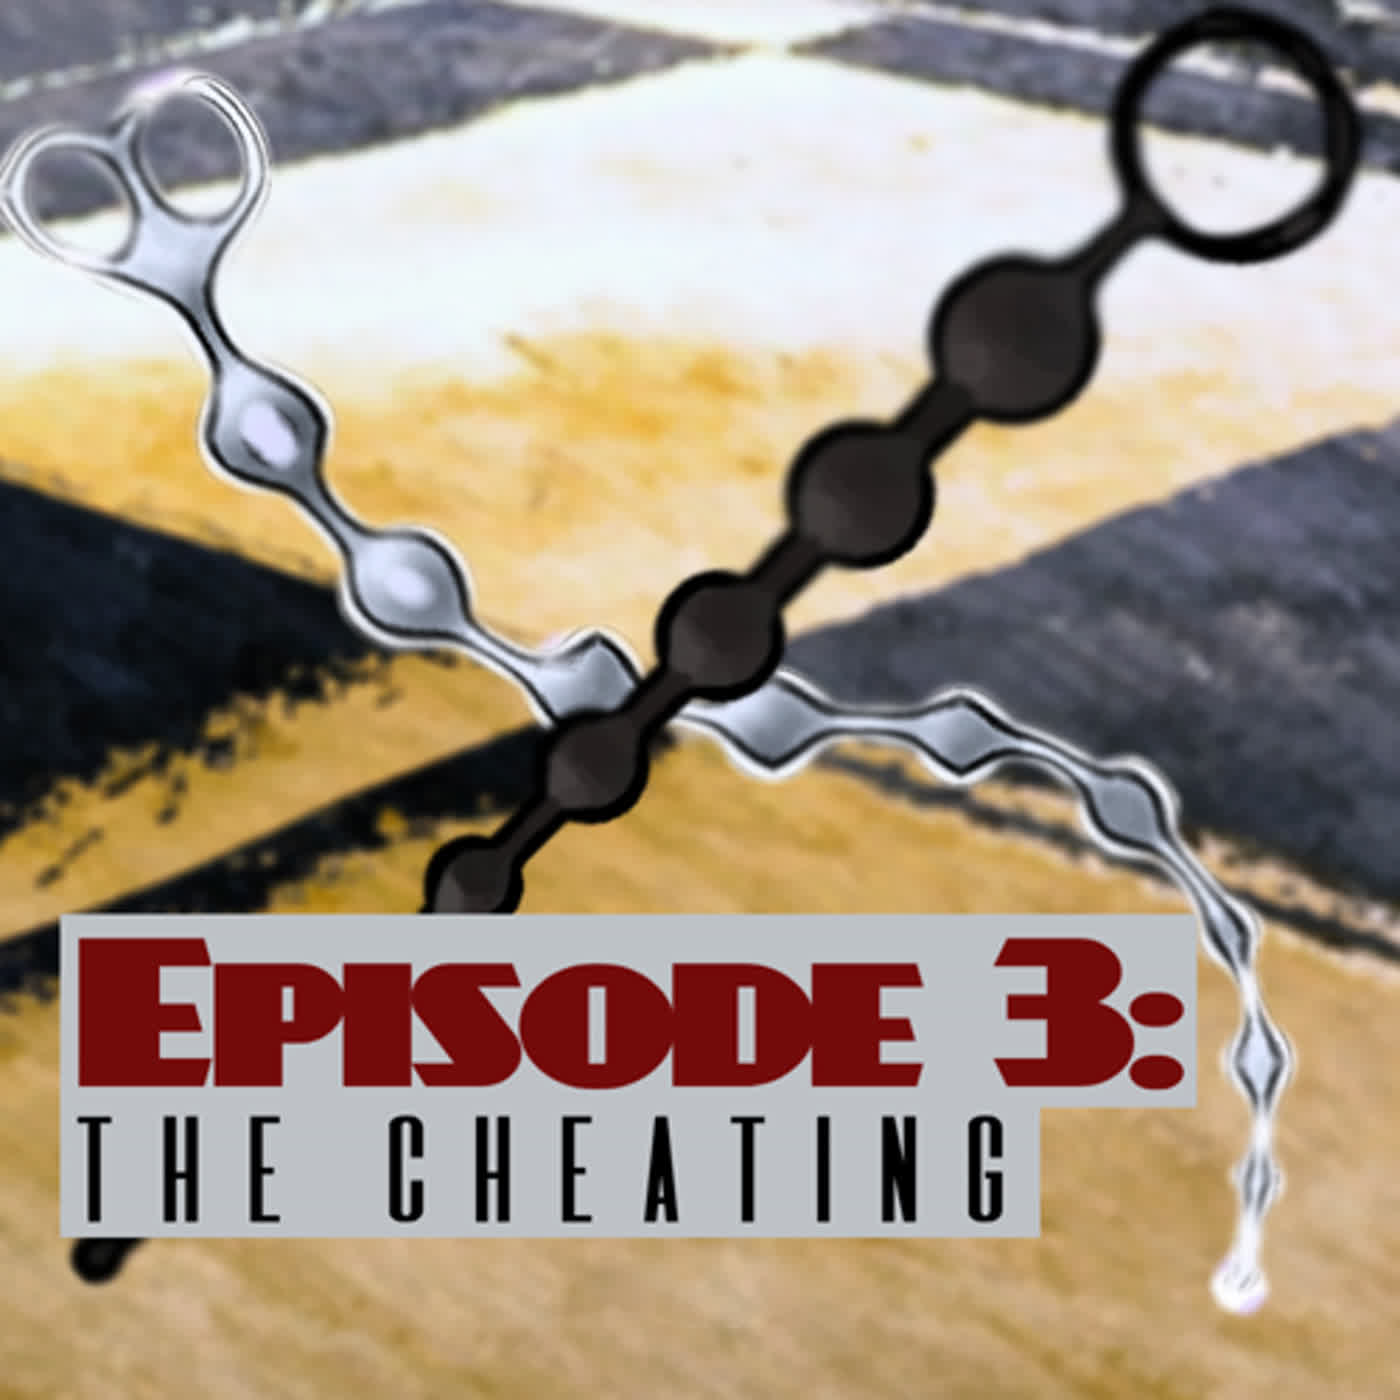 Episode 3: The Cheating